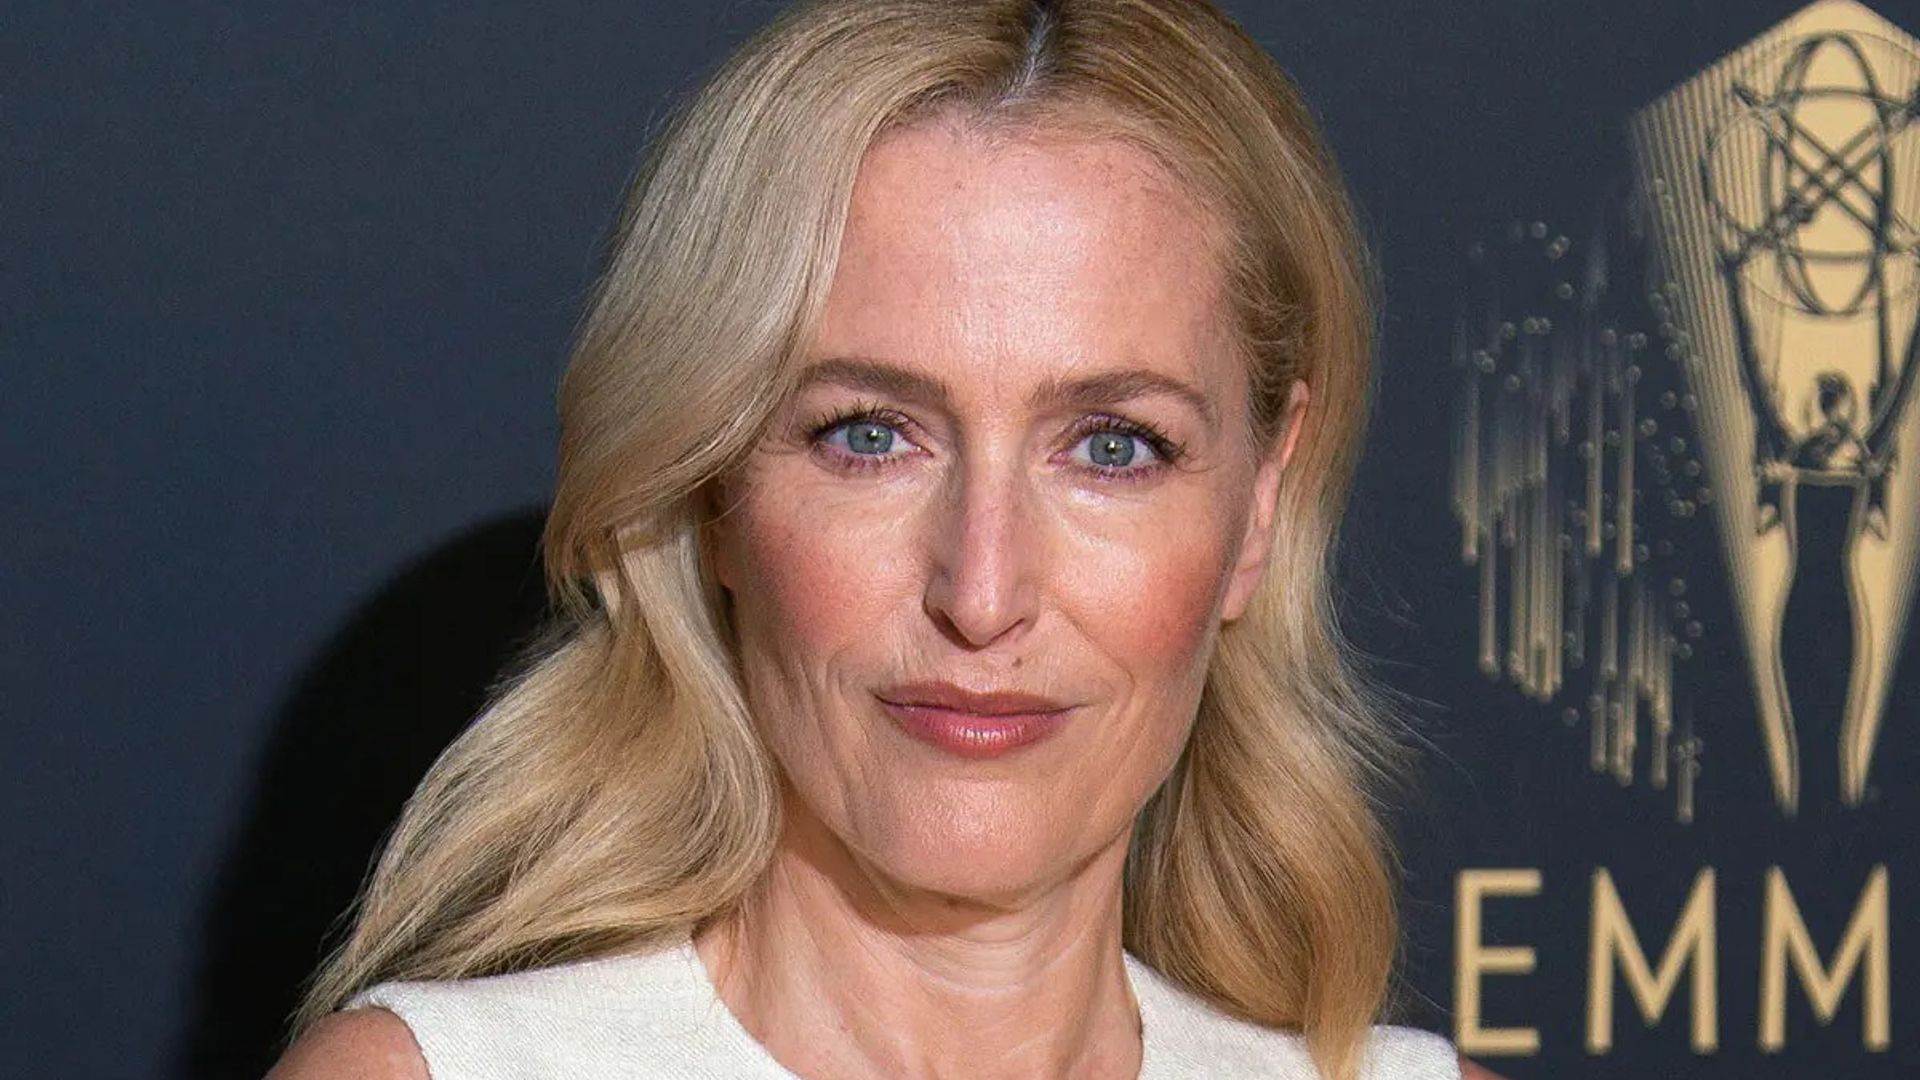 Gillian Anderson shows off bruised face in on-set snap